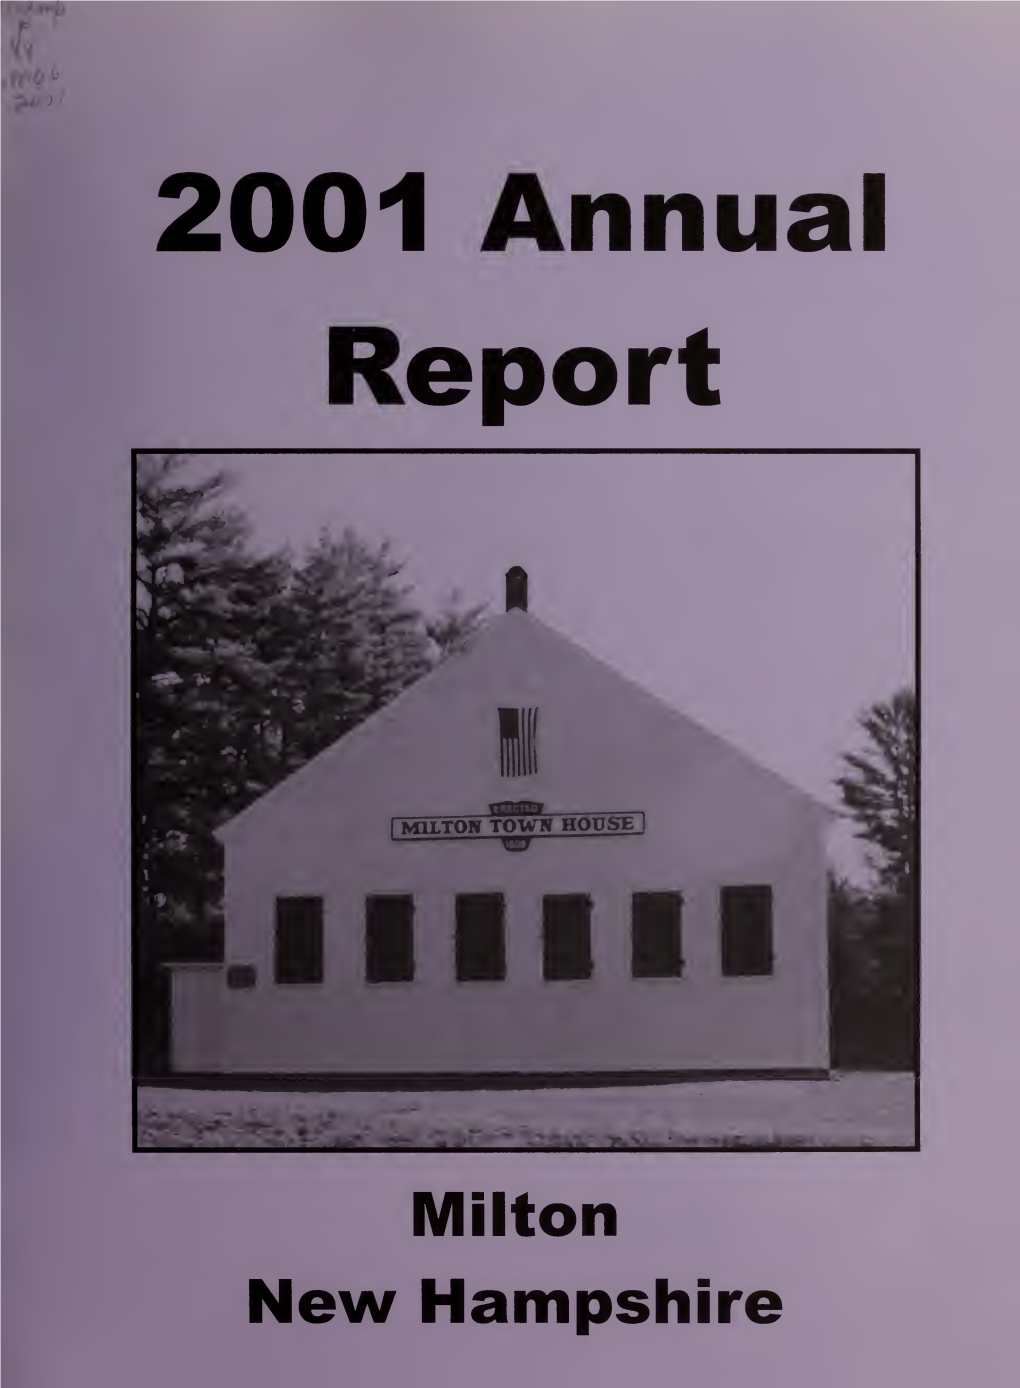 Annual Report of the Town of Milton, New Hampshire